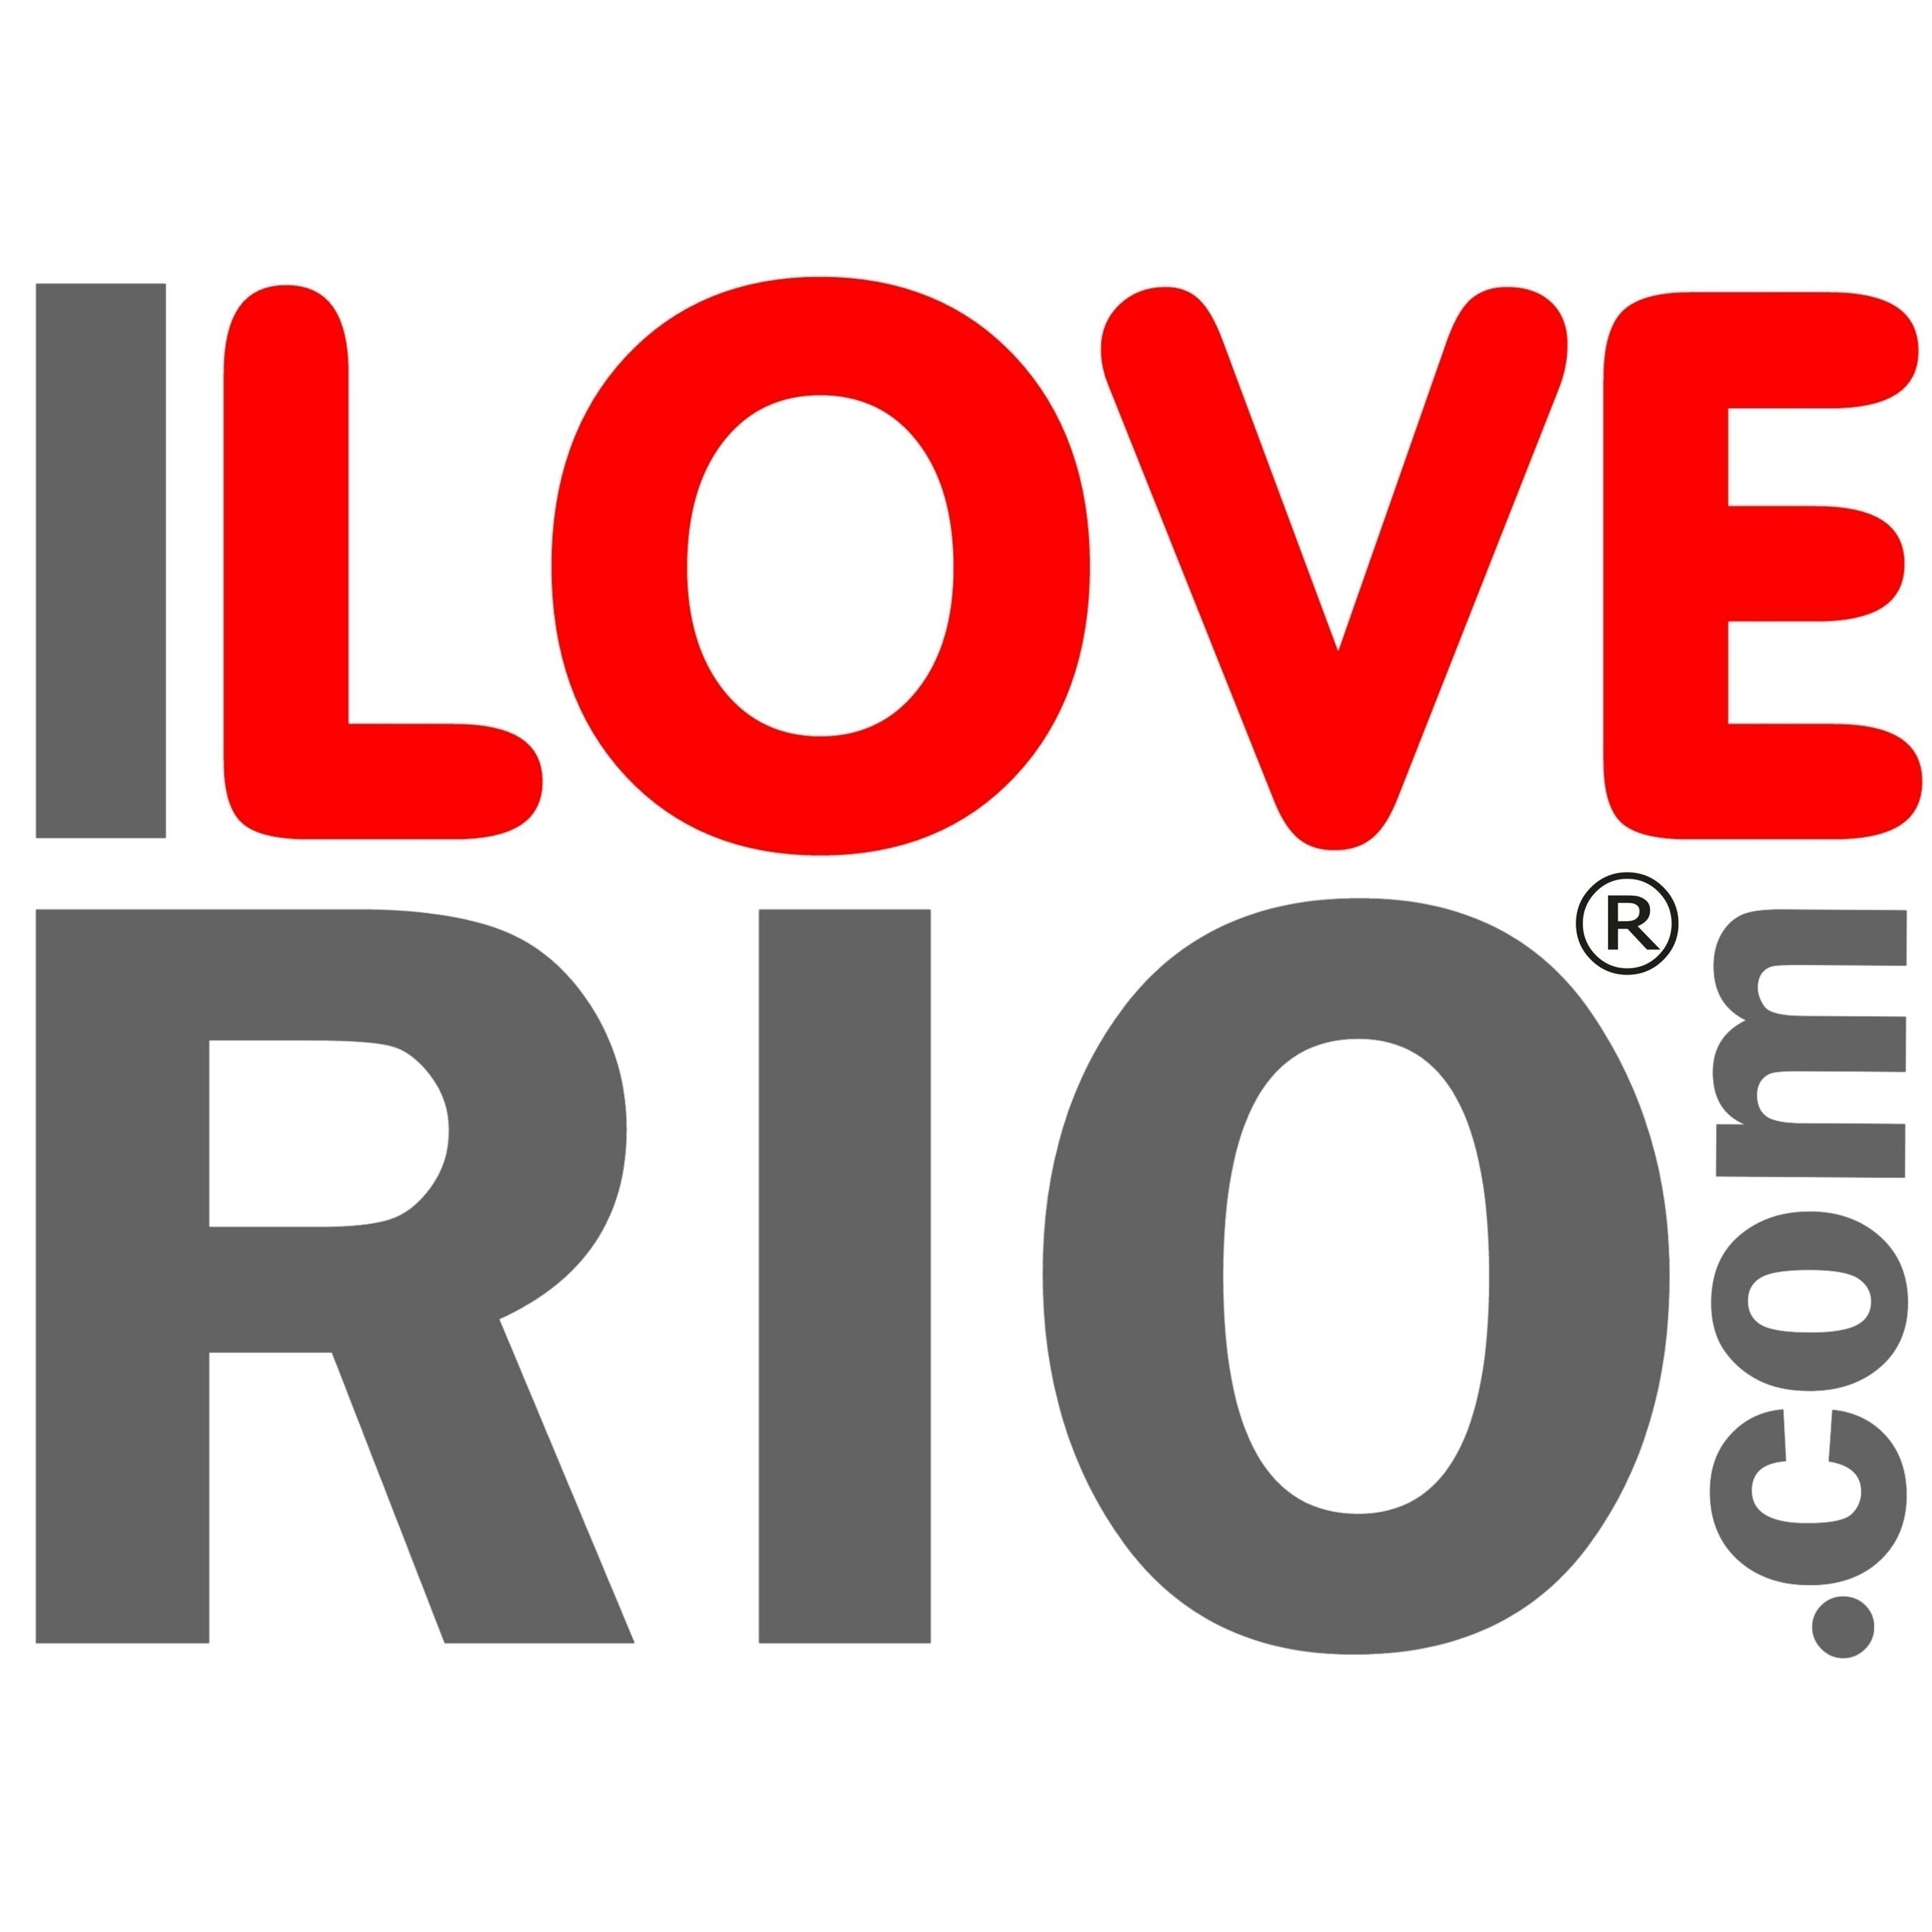 LOVE RIO is a presentation of Rio de Janeiro with a social, cultural and historical interpretation of all the aspects that make the city the beautiful and unique gem that it is today. Designed for both quality tourism and in-depth research, the Portal is a virtual stroll along the many corners of Rio that, for a lack of time or opportunity, cannot be directly experienced by the majority of visitors, allowing them to discover hidden dimensions of the city. www.iloverio.com